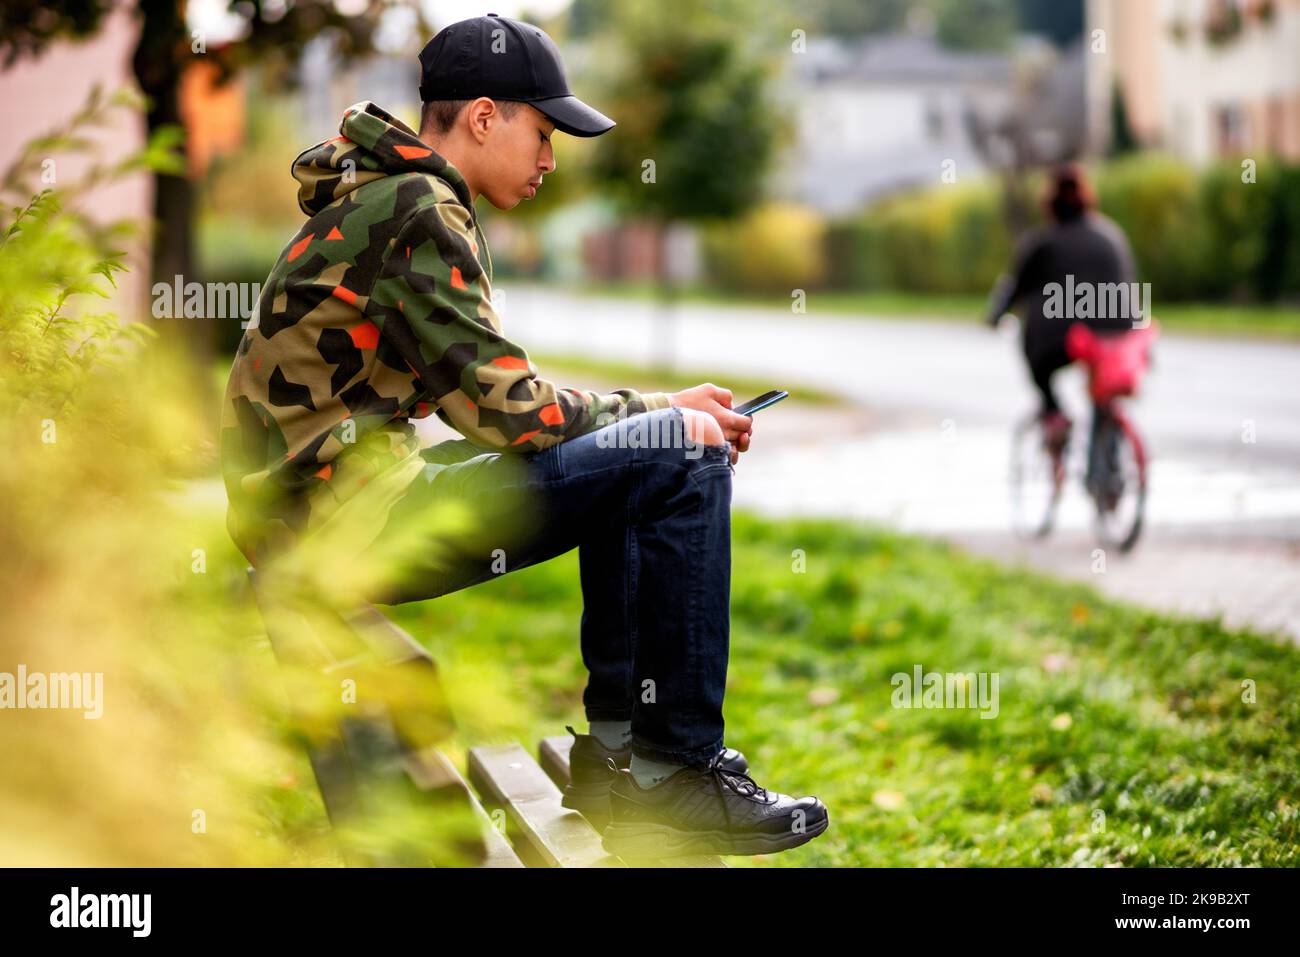 Young boy with black cap sitting on bench in city and using smarthphone. Stock Photo